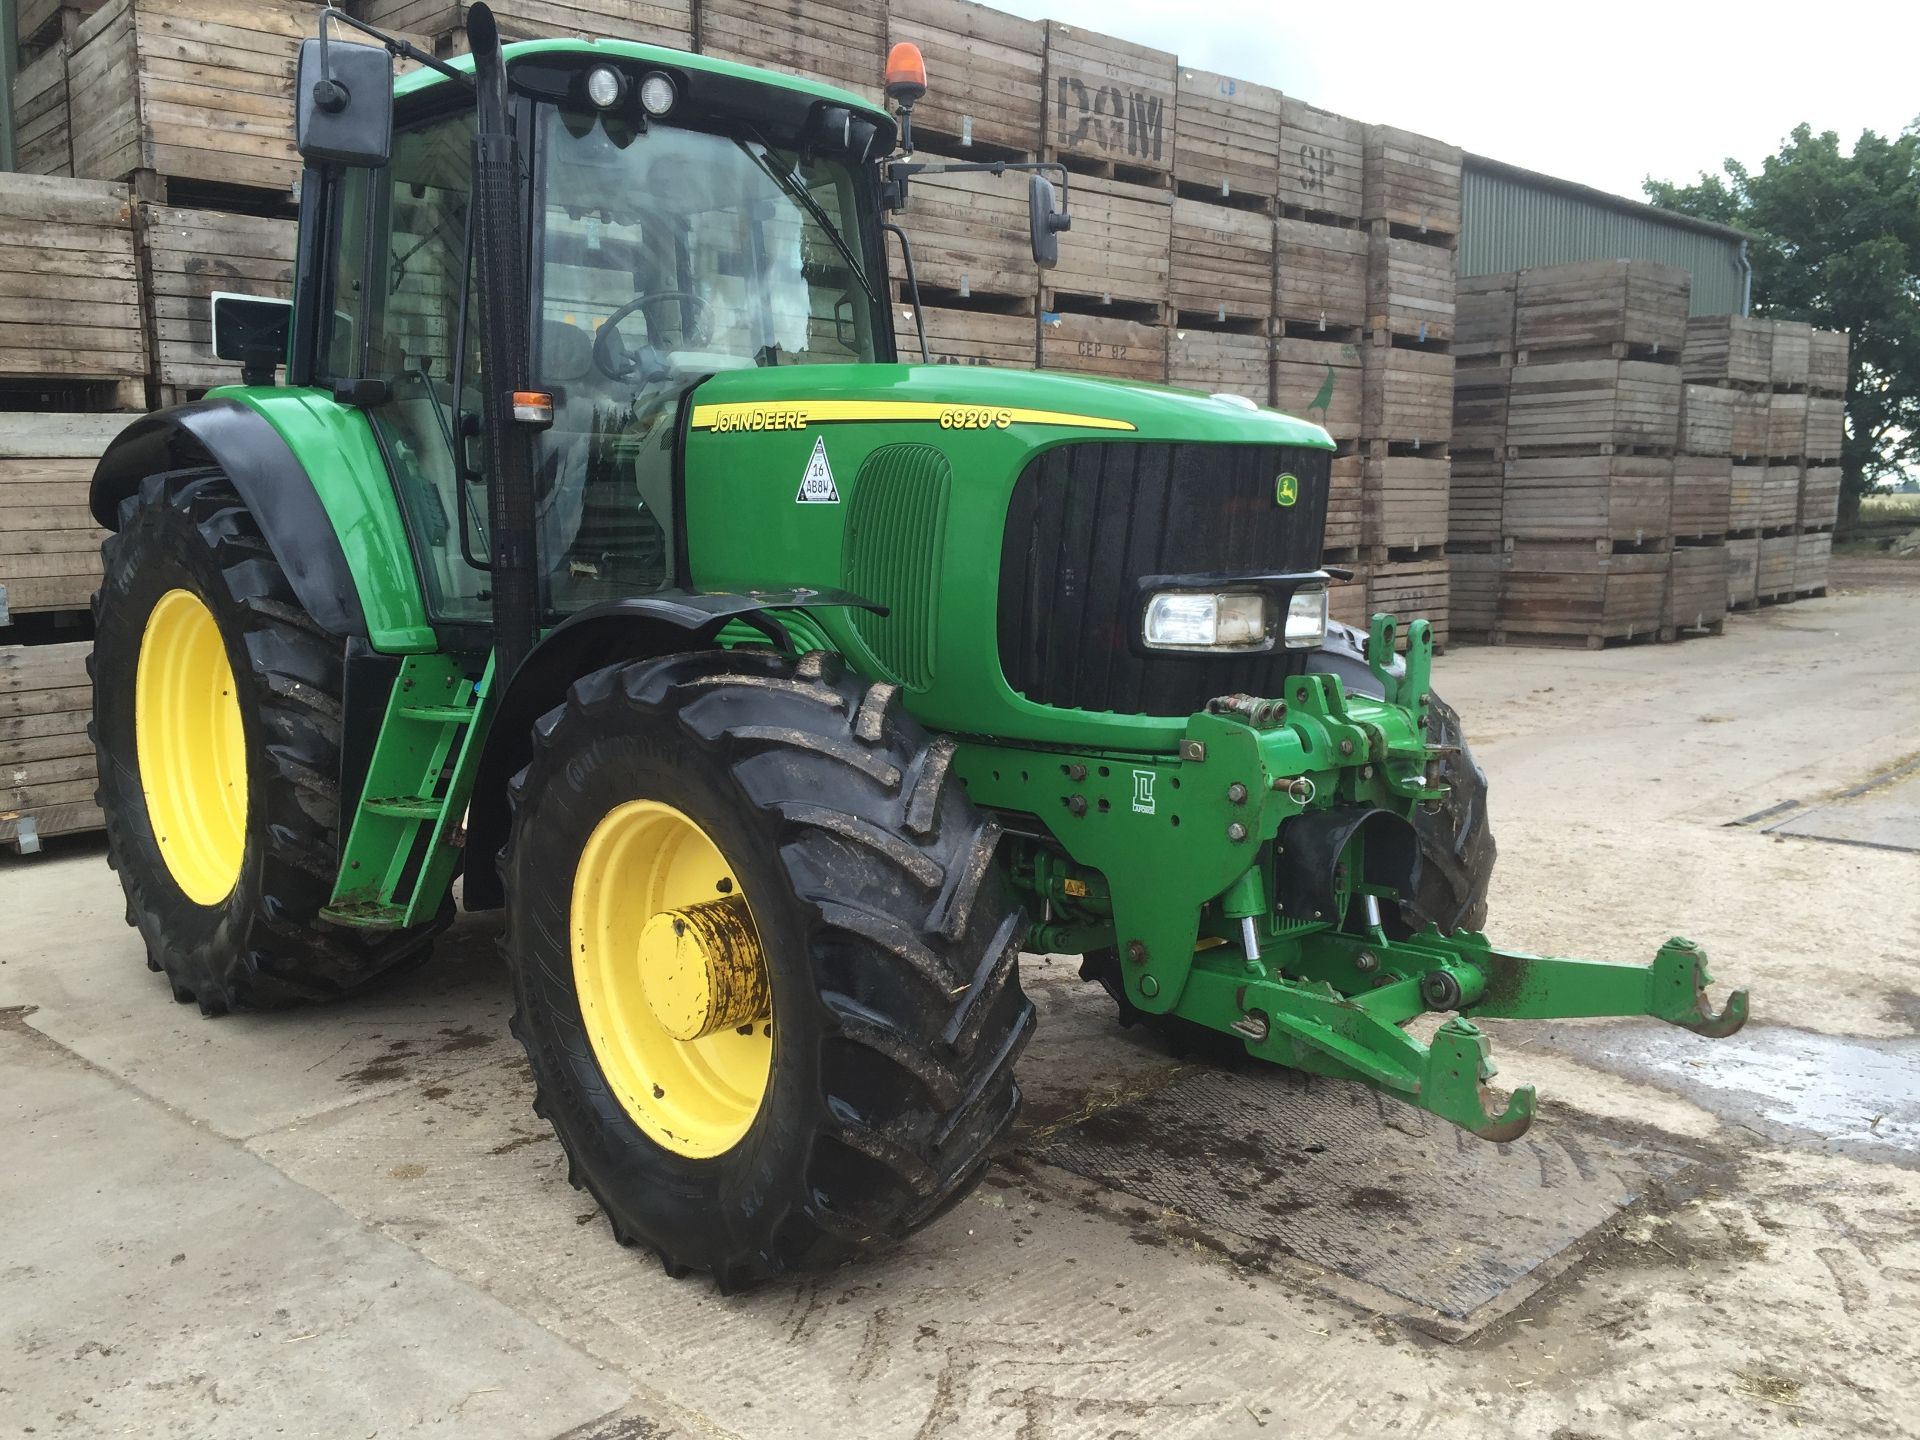 2005 John Deere 6920S Tractor 50k Power Quad c/w front linkage & pto. Location Bourne, Lincolnshire - Image 9 of 12